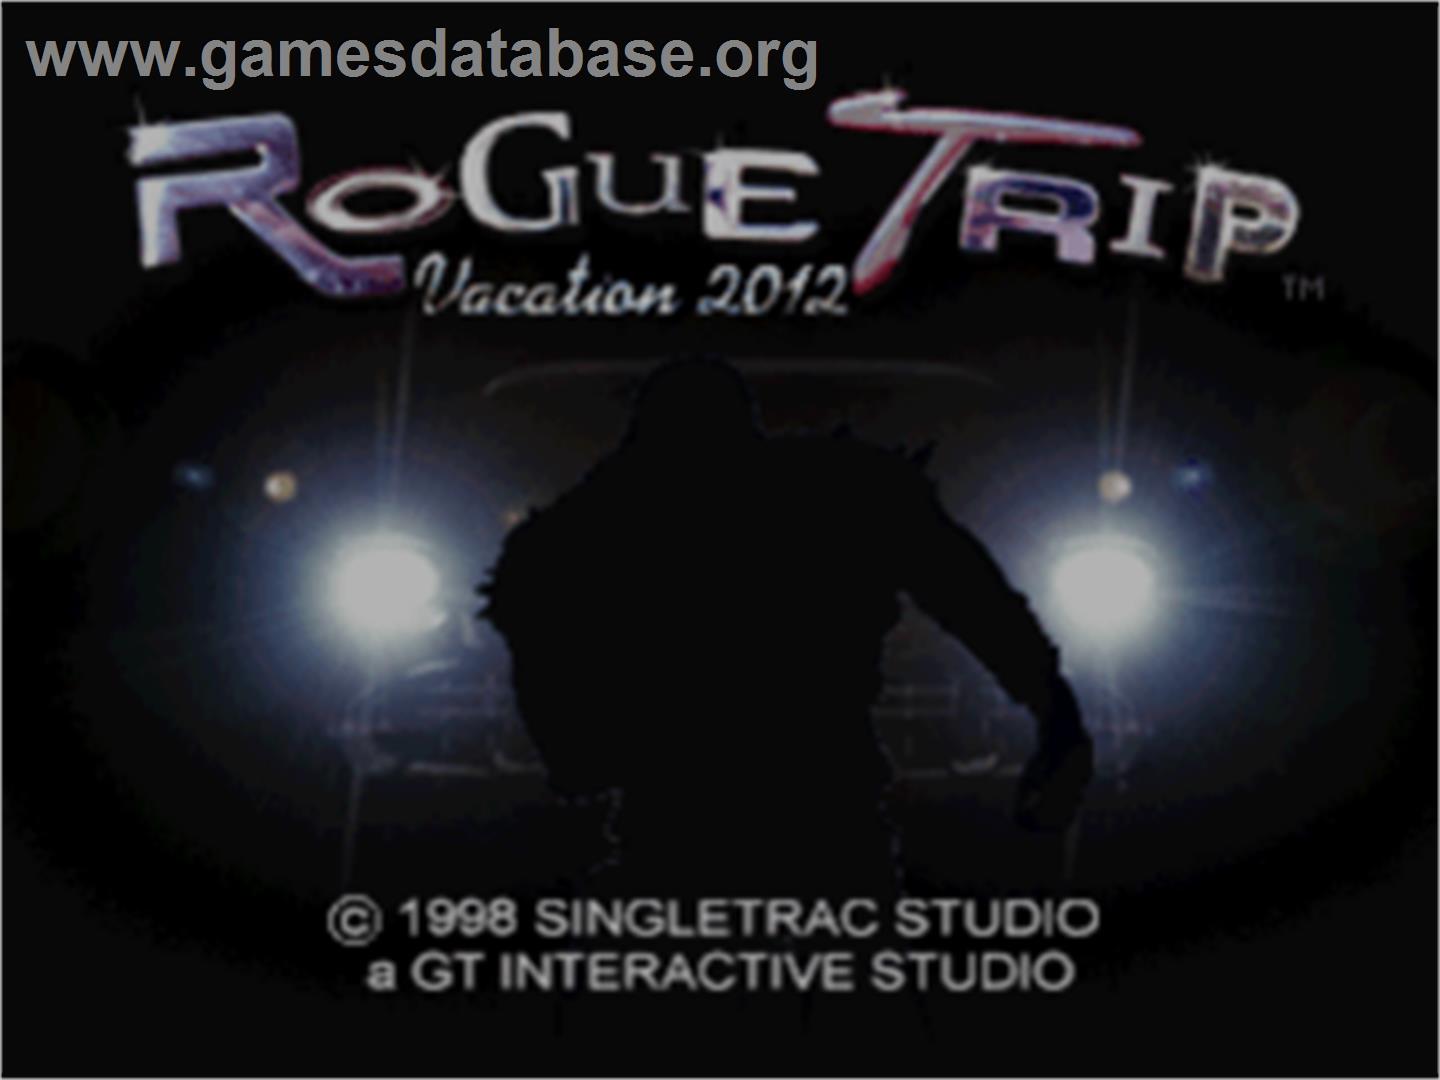 Rogue Trip: Vacation 2012 - Sony Playstation - Artwork - Title Screen